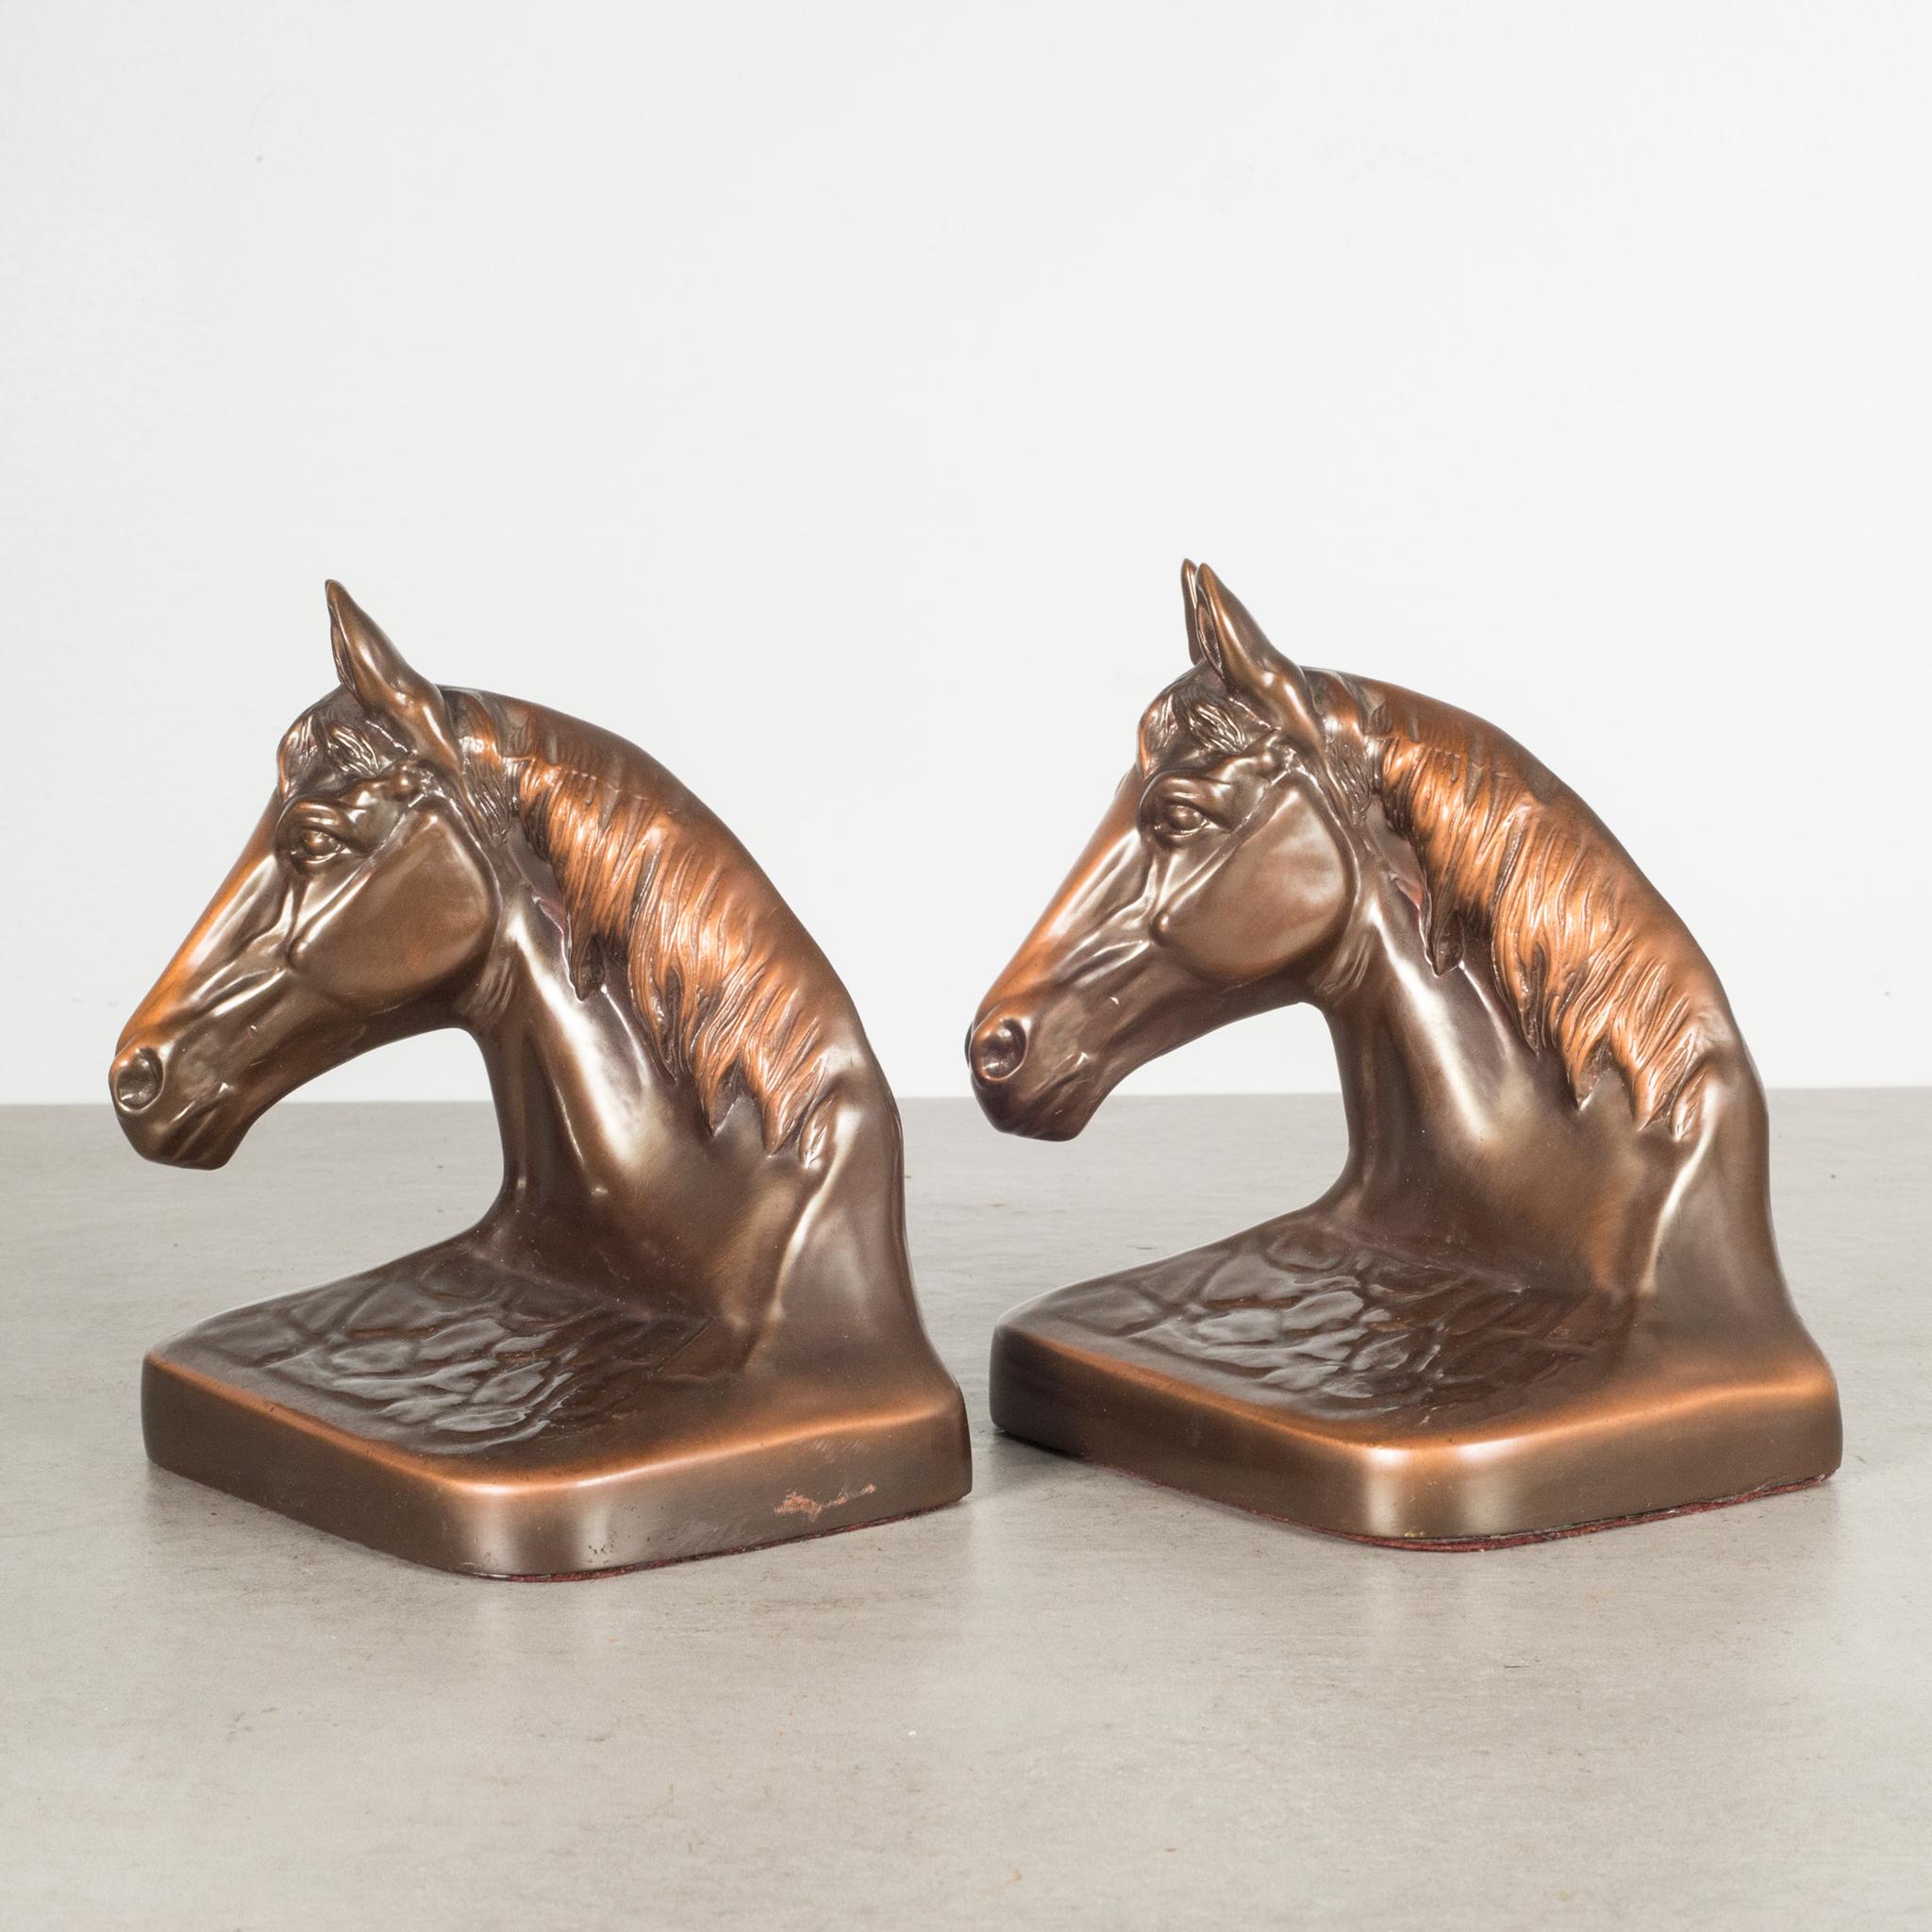 About

A vintage pair of bronze plated bookends with horse heads mounted on a simulated leather imprint.

Creator unknown.
Date of manufacture circa 1940s.
Materials and techniques cast gray metal, satin bronze finish.
Condition good. Wear